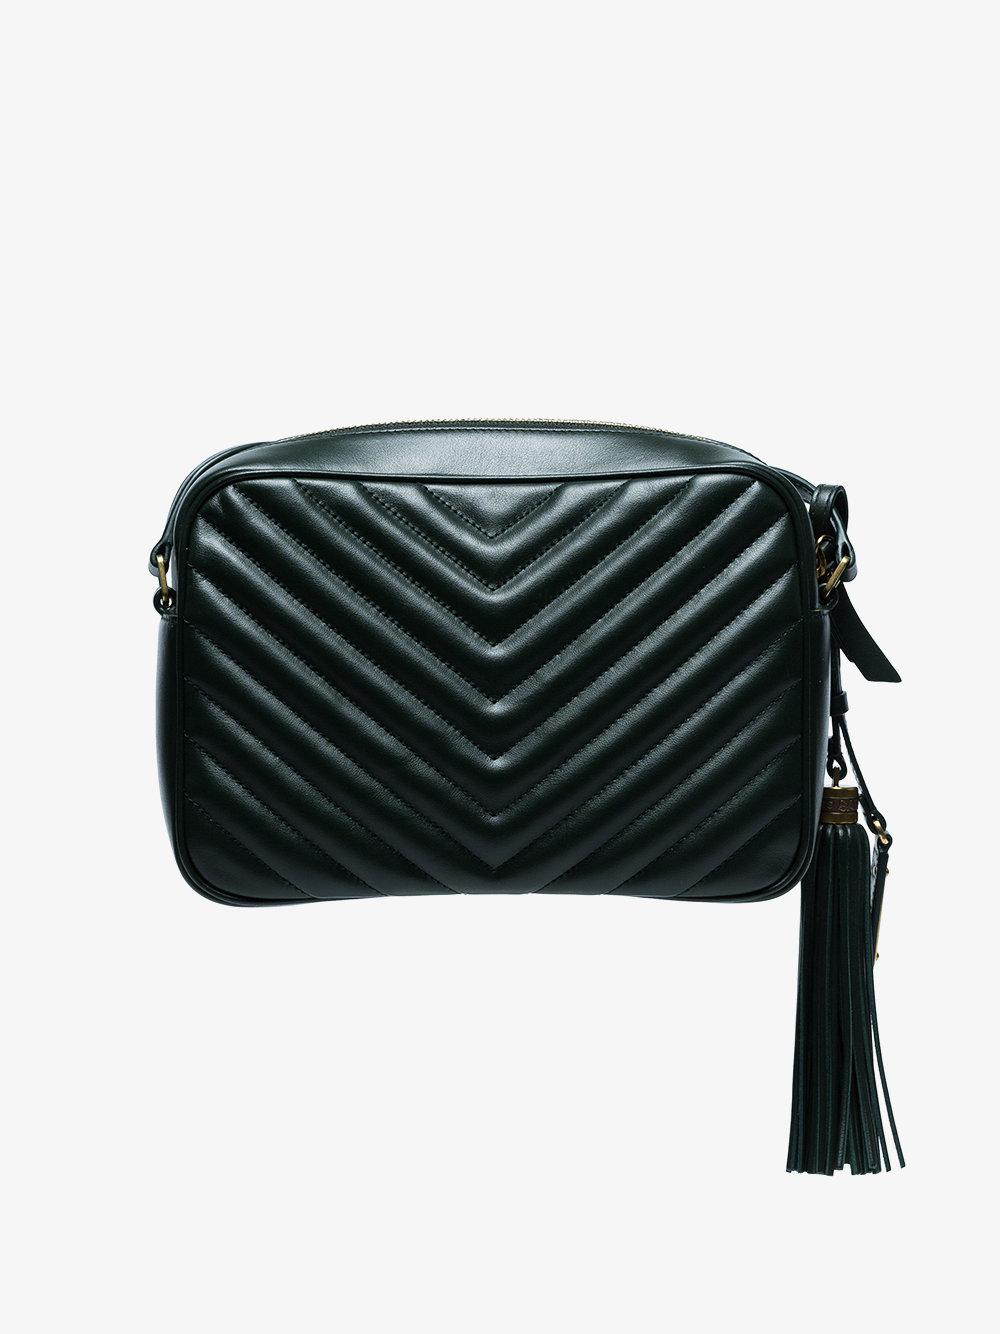 Saint Laurent Green Lou Quilted Leather Camera Bag - Lyst